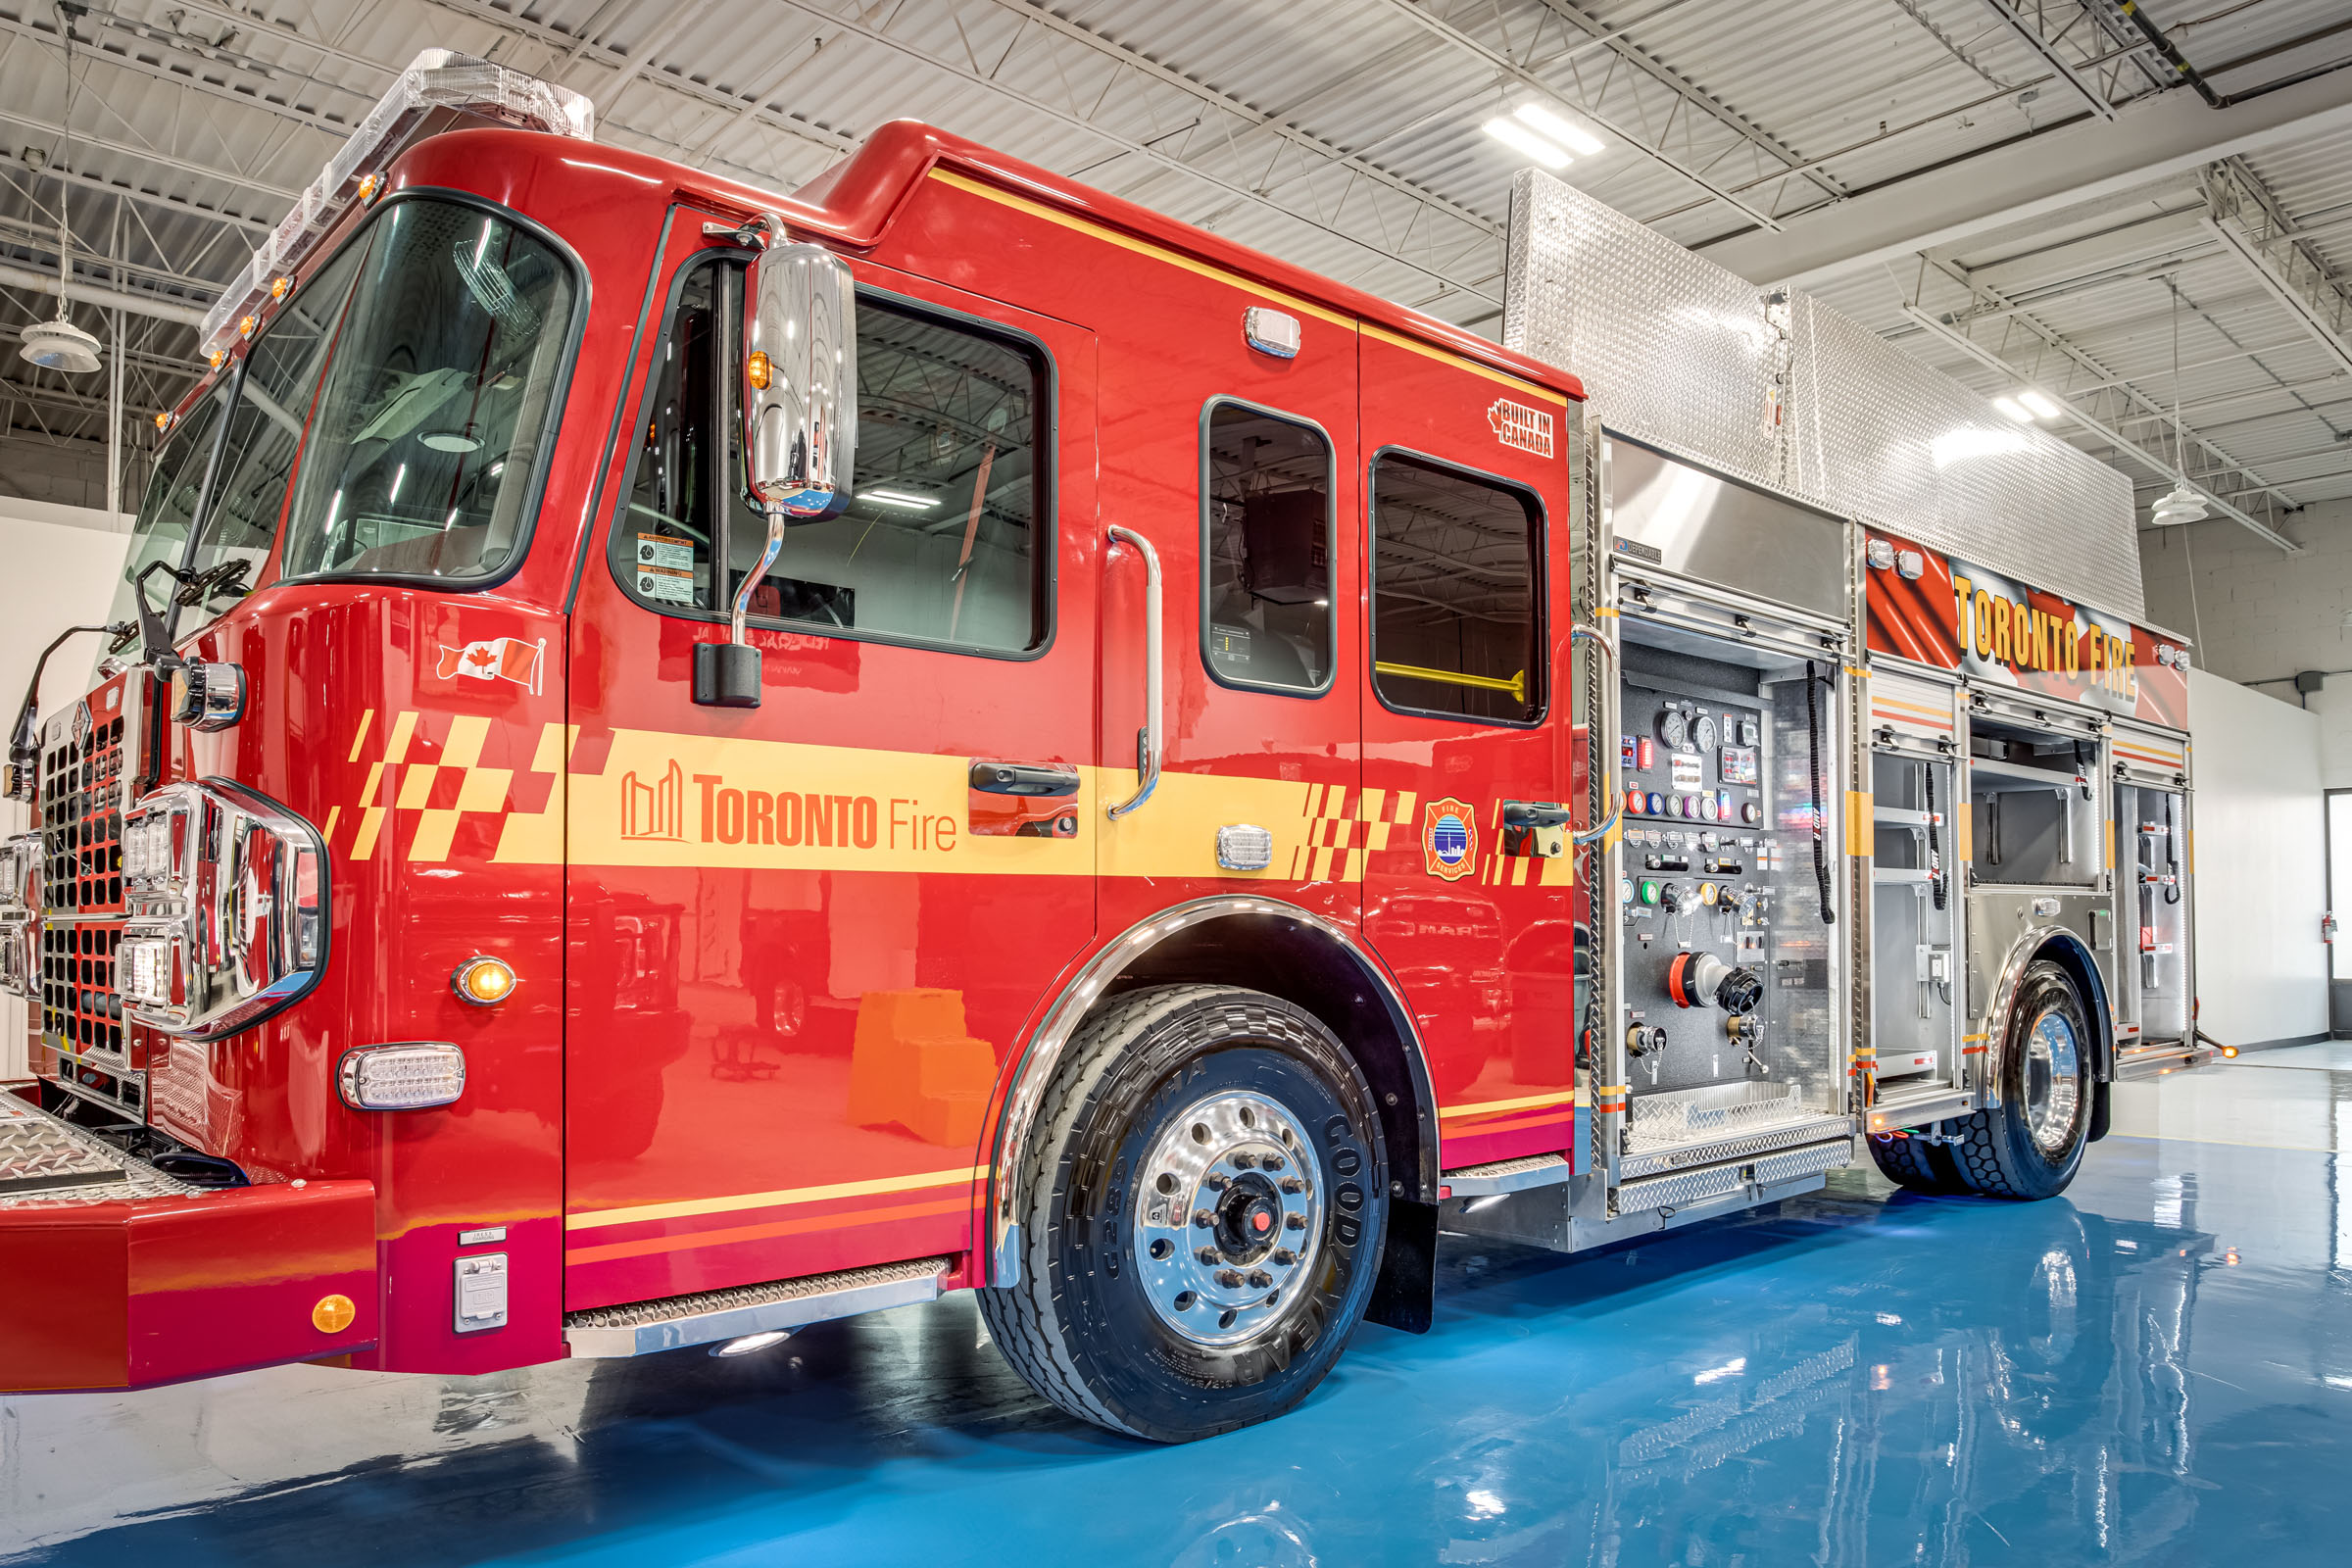 A Dependable fire truck equipped with Volta Power Systems. One of a 16-truck contract with Toronto Fire Services, the truck can support all critical electrical needs for hours without idling.